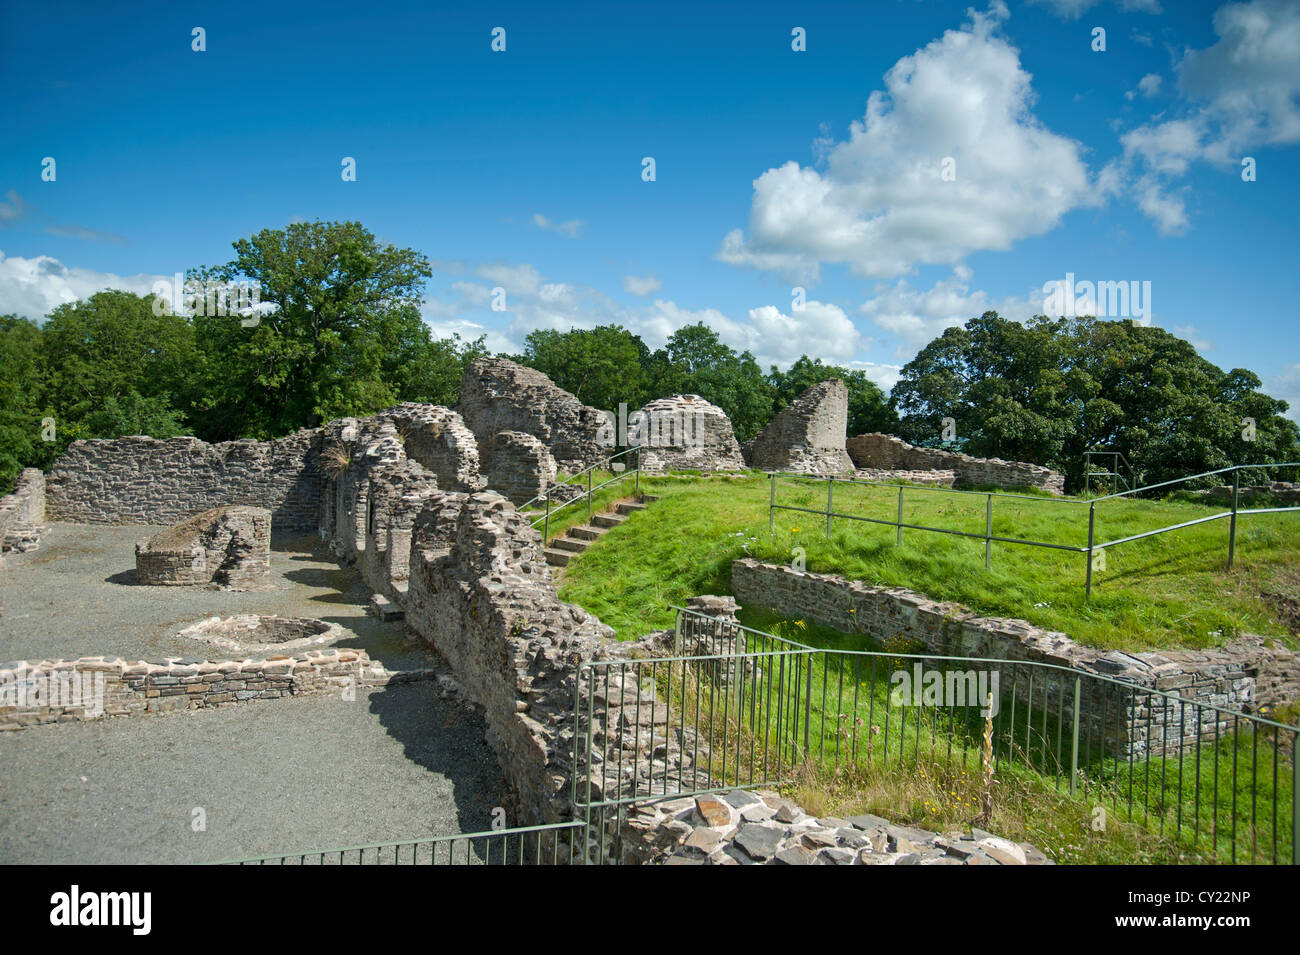 Dolforwyn Castle, recently excavated ruins in Powys, Montgomeryshire. Mid Wales.  SCO 8711 Stock Photo